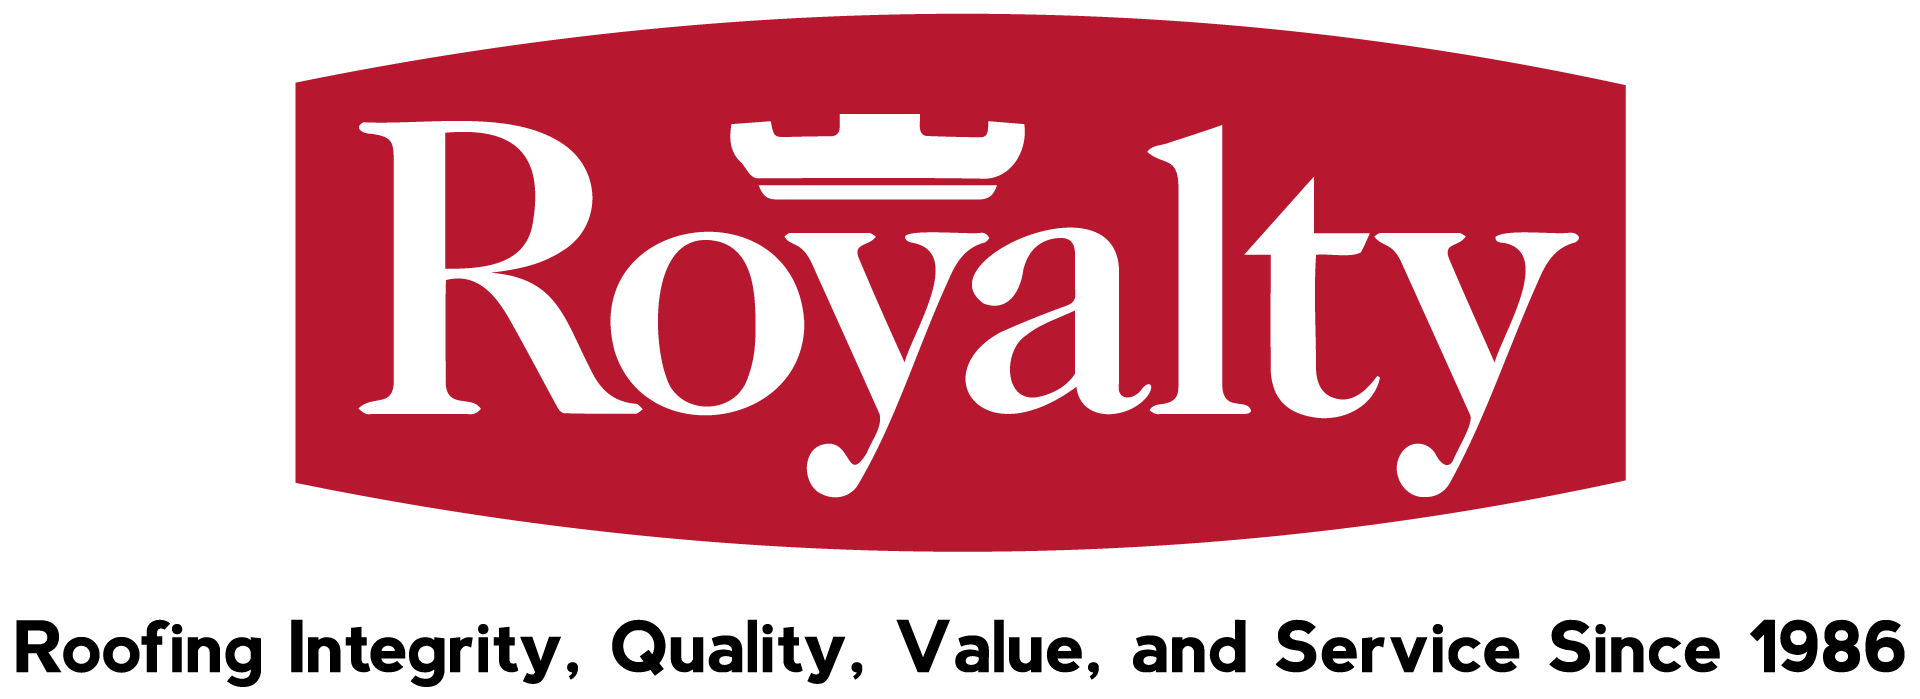 RoyaltyRoofing_logo_WHTText.png